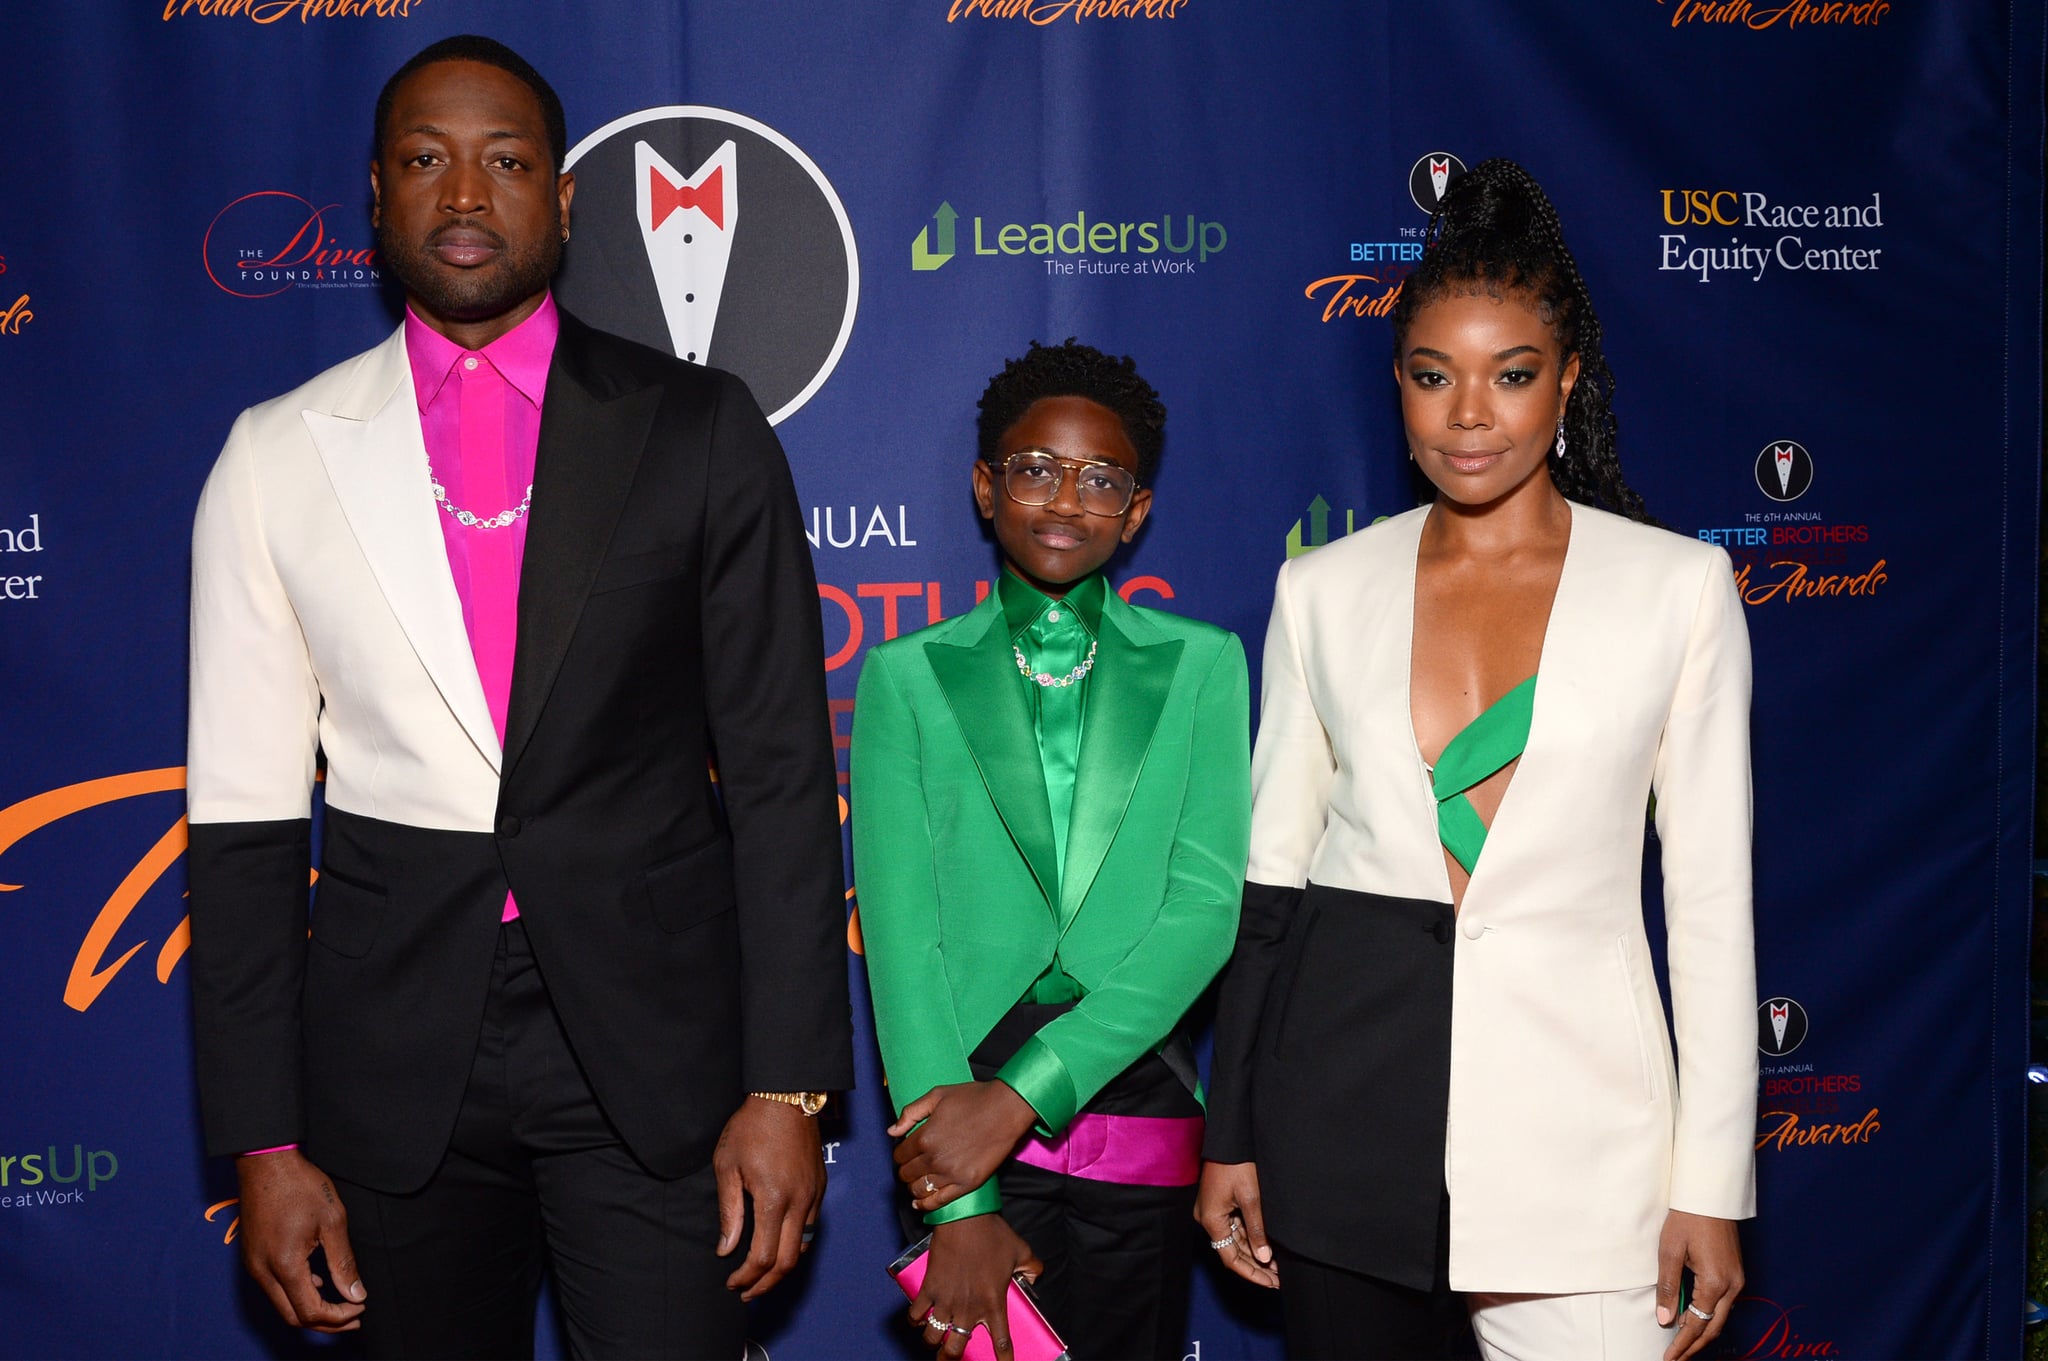 LOS ANGELES, CALIFORNIA - MARCH 07: (L-R) Dwyane Wade, Zaya Wade and Gabrielle Union attend the Better Brothers Los Angeles' 6th annual Truth Awards at Taglyan Complex on March 07, 2020 in Los Angeles, California. (Photo by Andrew Toth/Getty Images)